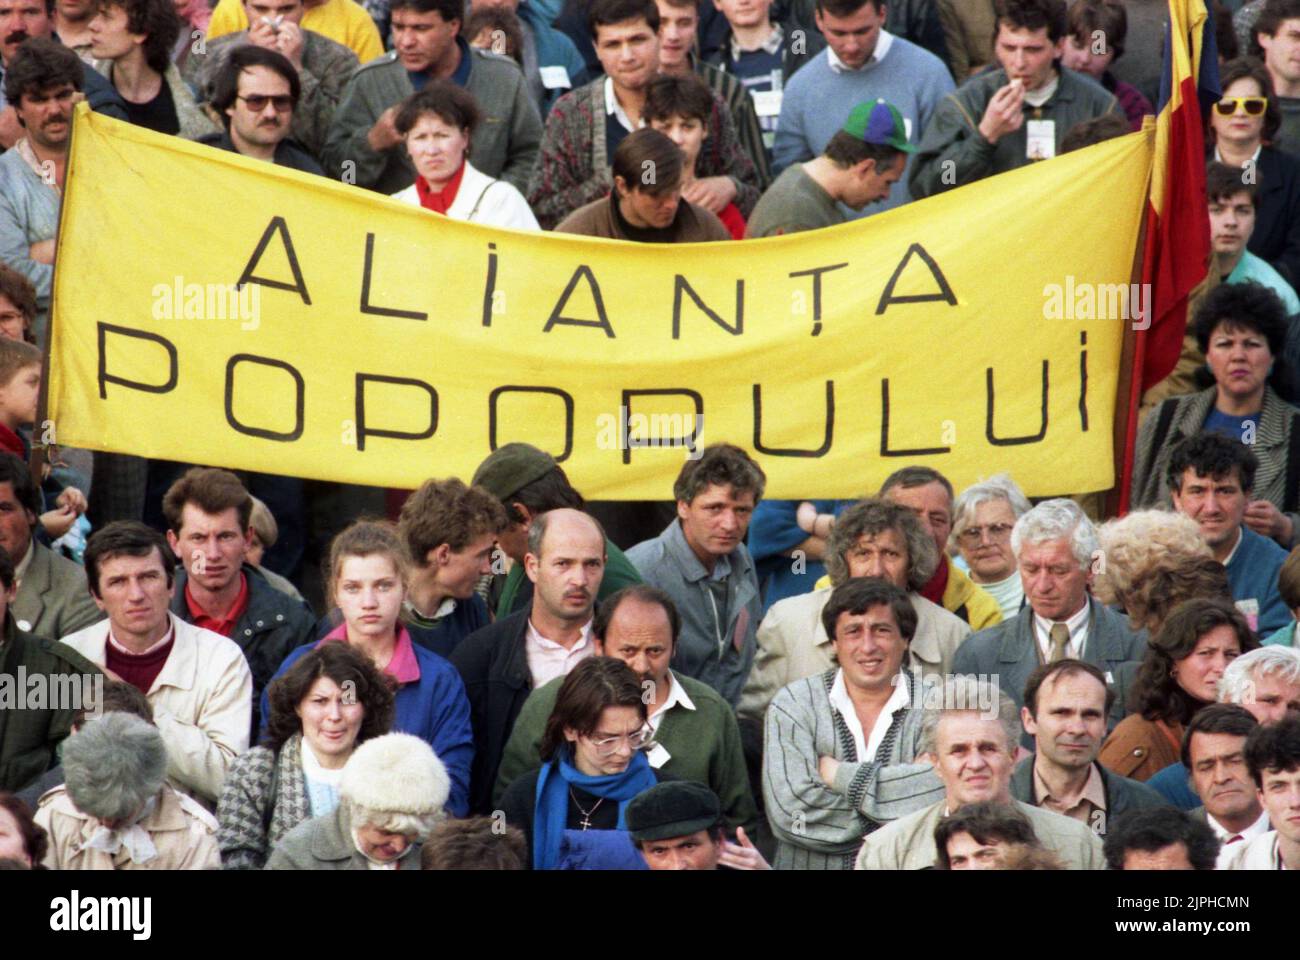 Bucharest, Romania, April 1990. 'Golaniada', a major anti-communism protest  in the University Square following the Romanian Revolution of 1989. People would gather daily to protest the ex-communists that grabbed the power after the Revolution. The main demand was that no former party member would be allowed to run in the elections of May 20th. The banner says 'The people's alliance'. Stock Photo